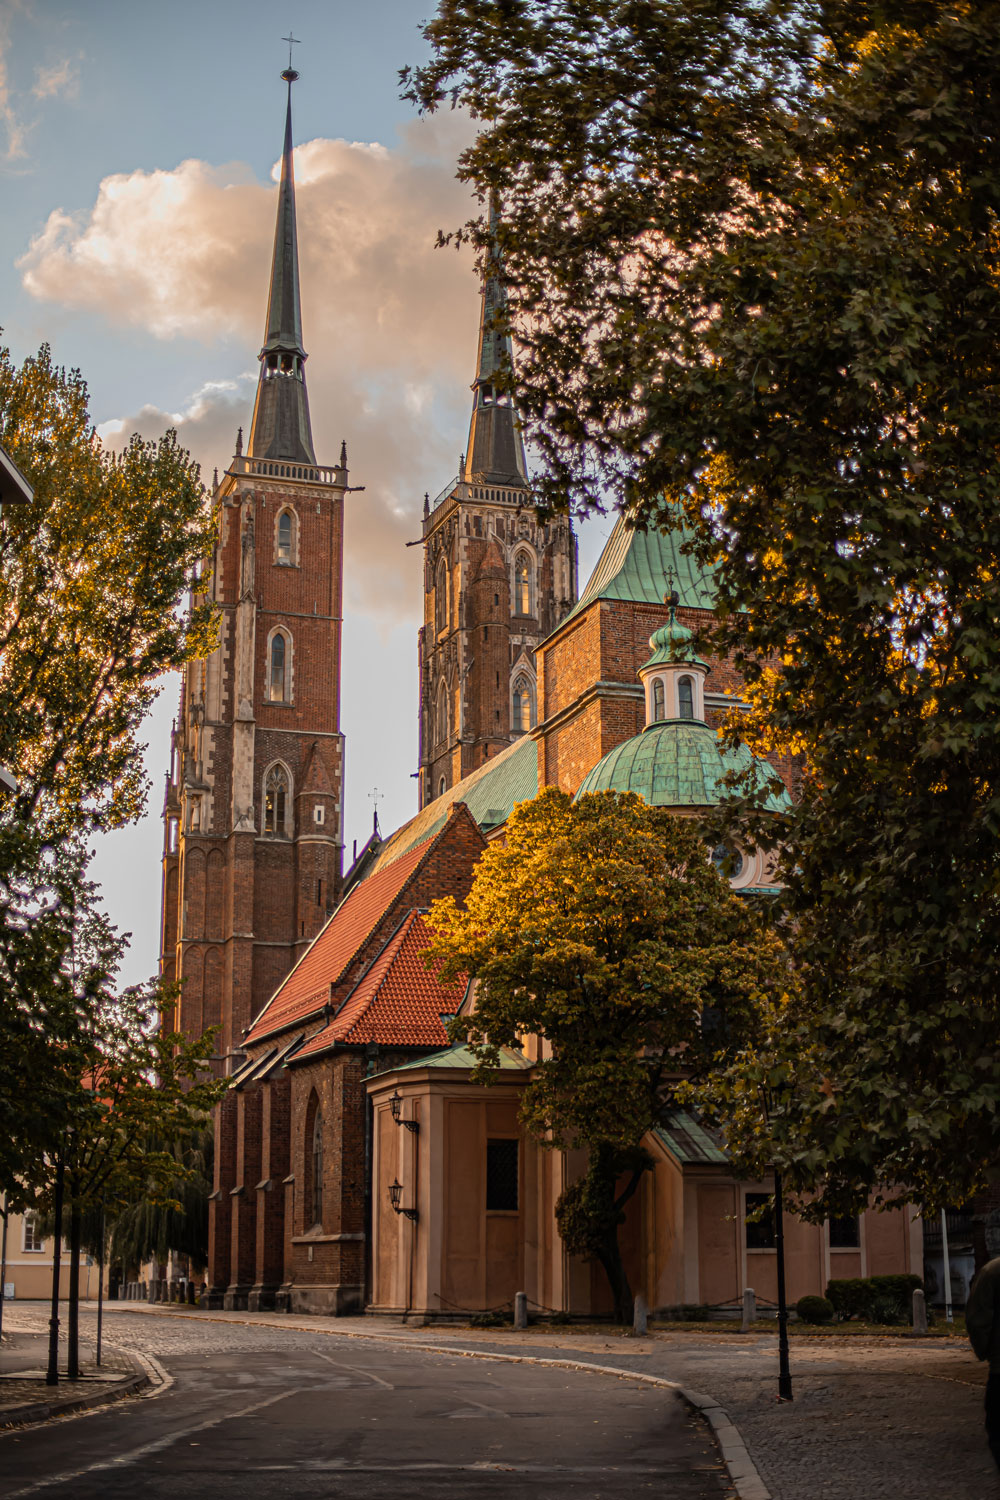 Cathedral of St. John the Baptist things-to-do-in-wroclaw-poland-kelseyinlondon-kelsey-heinrichs-uk-travel-blogger-Wrocław-travel-guide